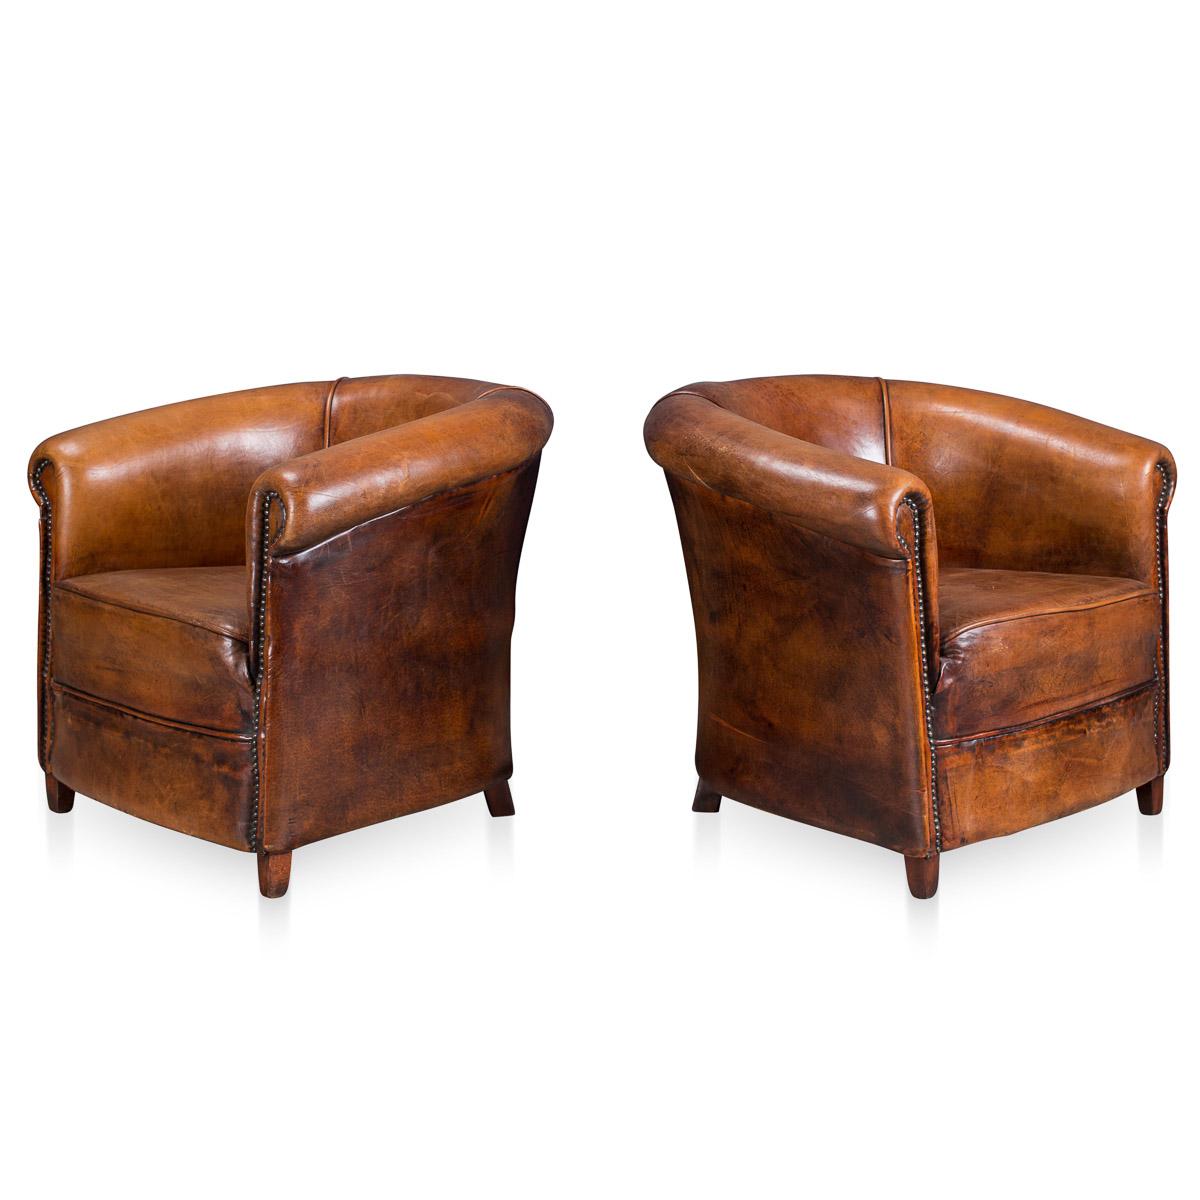 Showing superb patina and color, this wonderful pair of tub chairs were hand upholstered sheepskin leather in Holland by the finest craftsmen. Fantastic look for any interior, both modern and traditional.
 
Condition:

In excellent condition, no